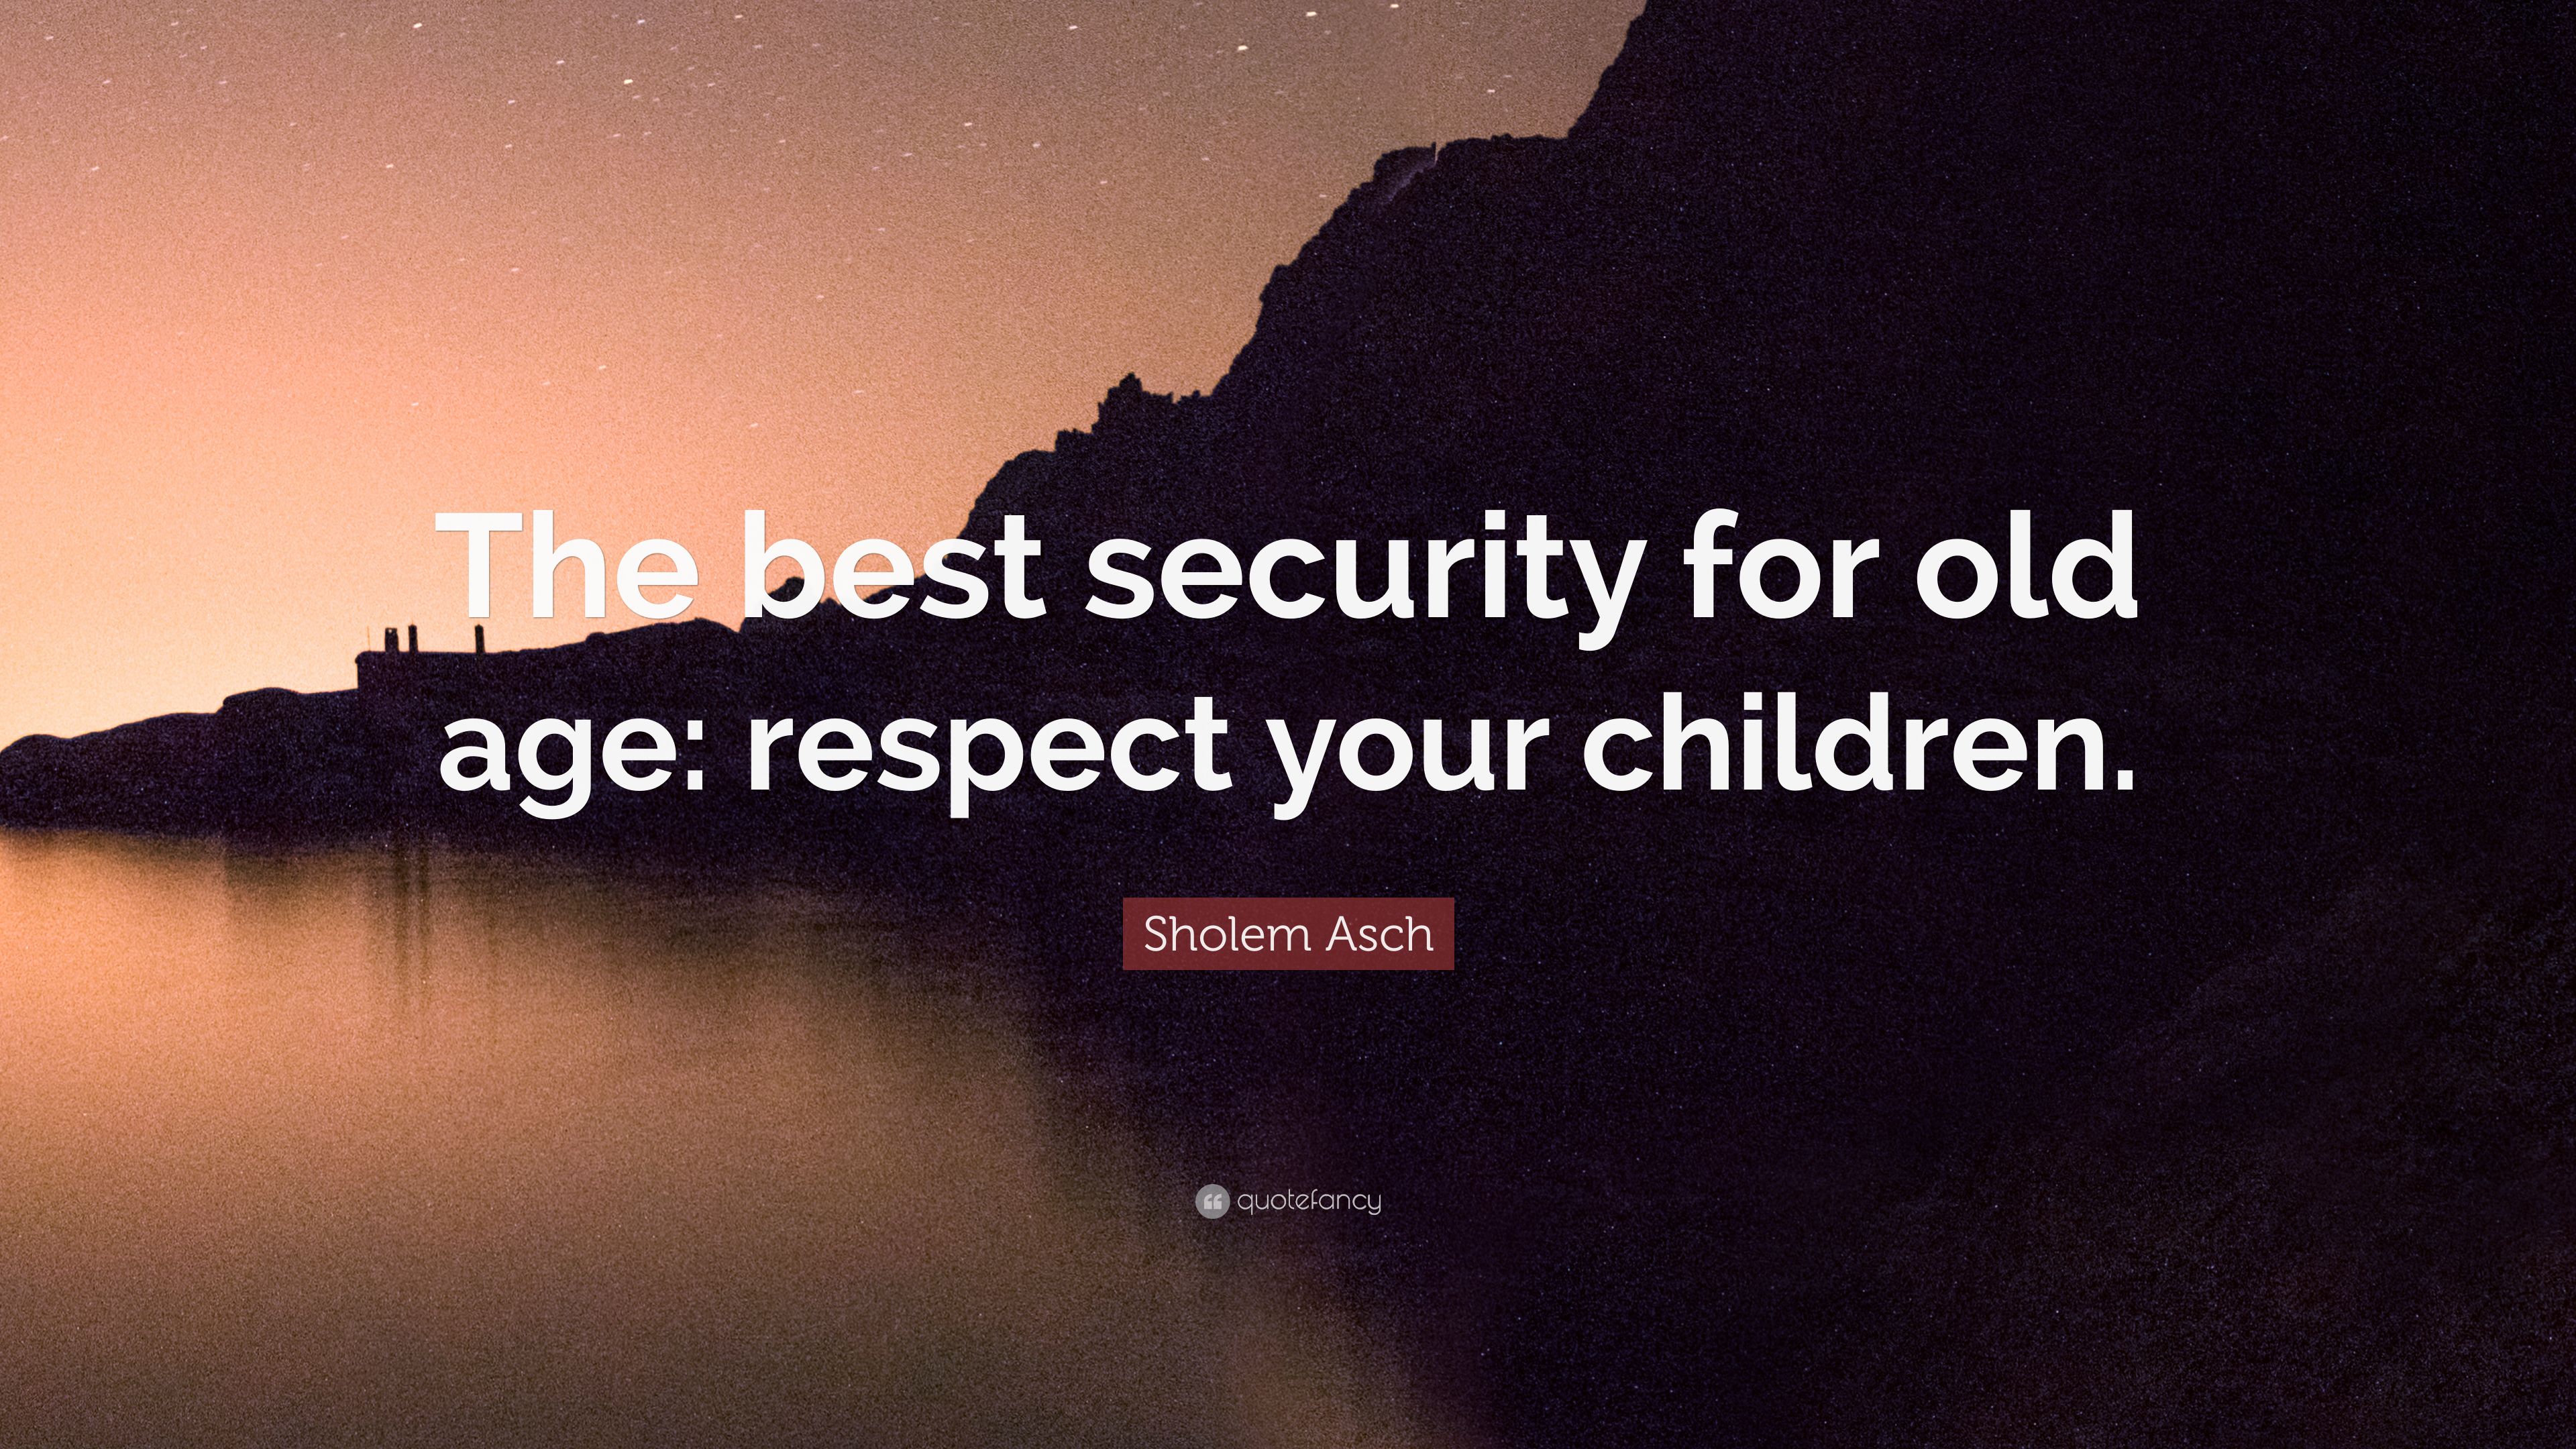 Sholem Asch Quote: “The best security for old age: respect your children.” (7 wallpaper)